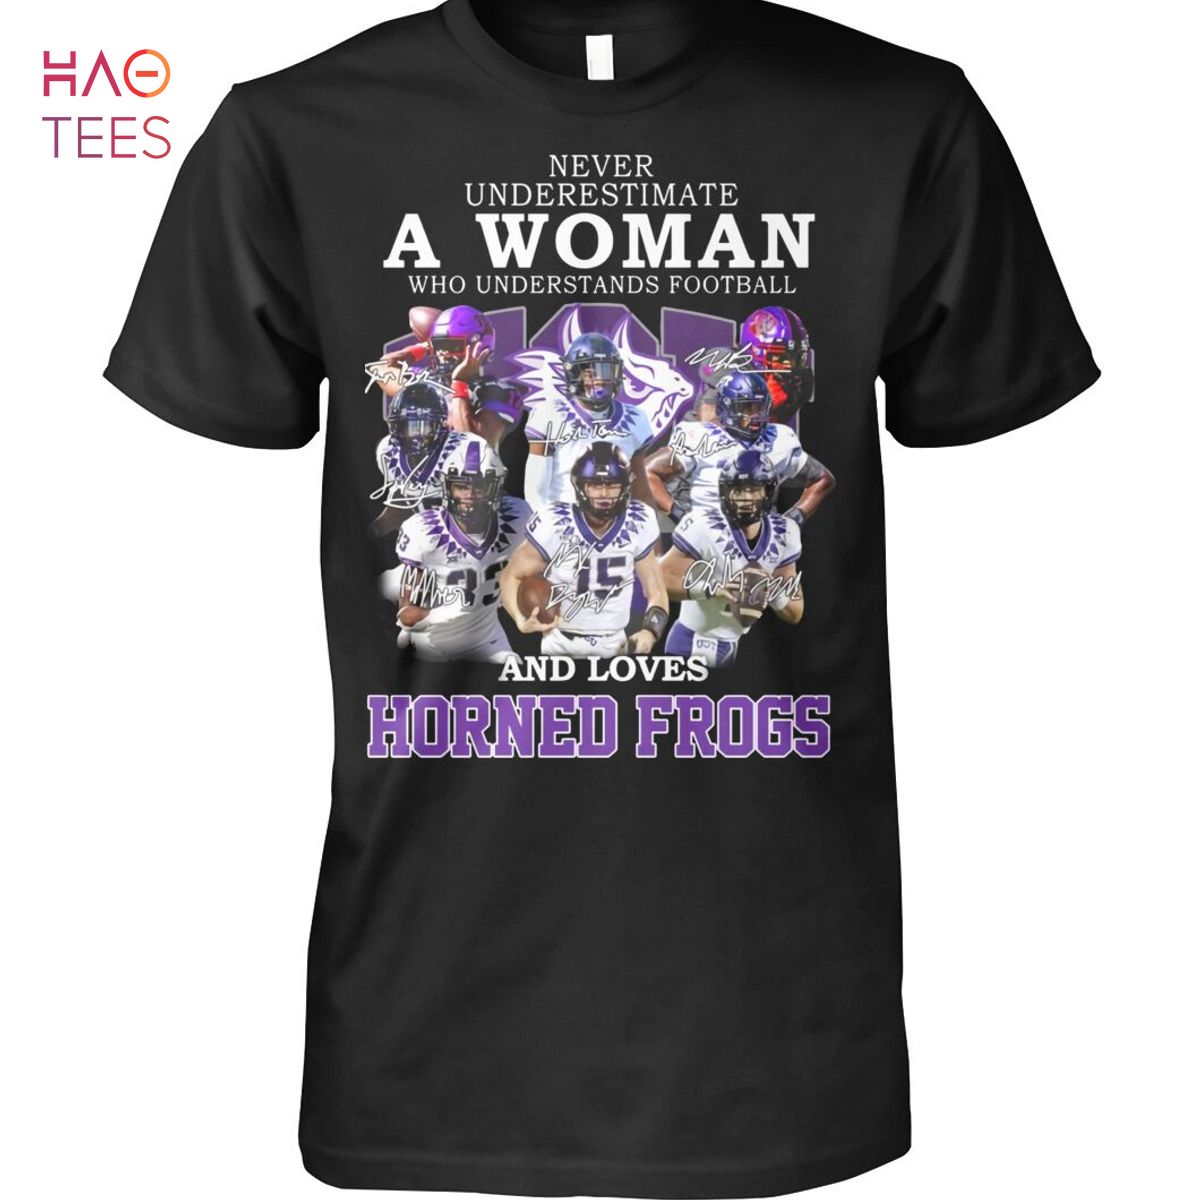 Never Underestimate A Woman Who Understands Football And Loves Horned Frogs Shirt Unisex Shirt